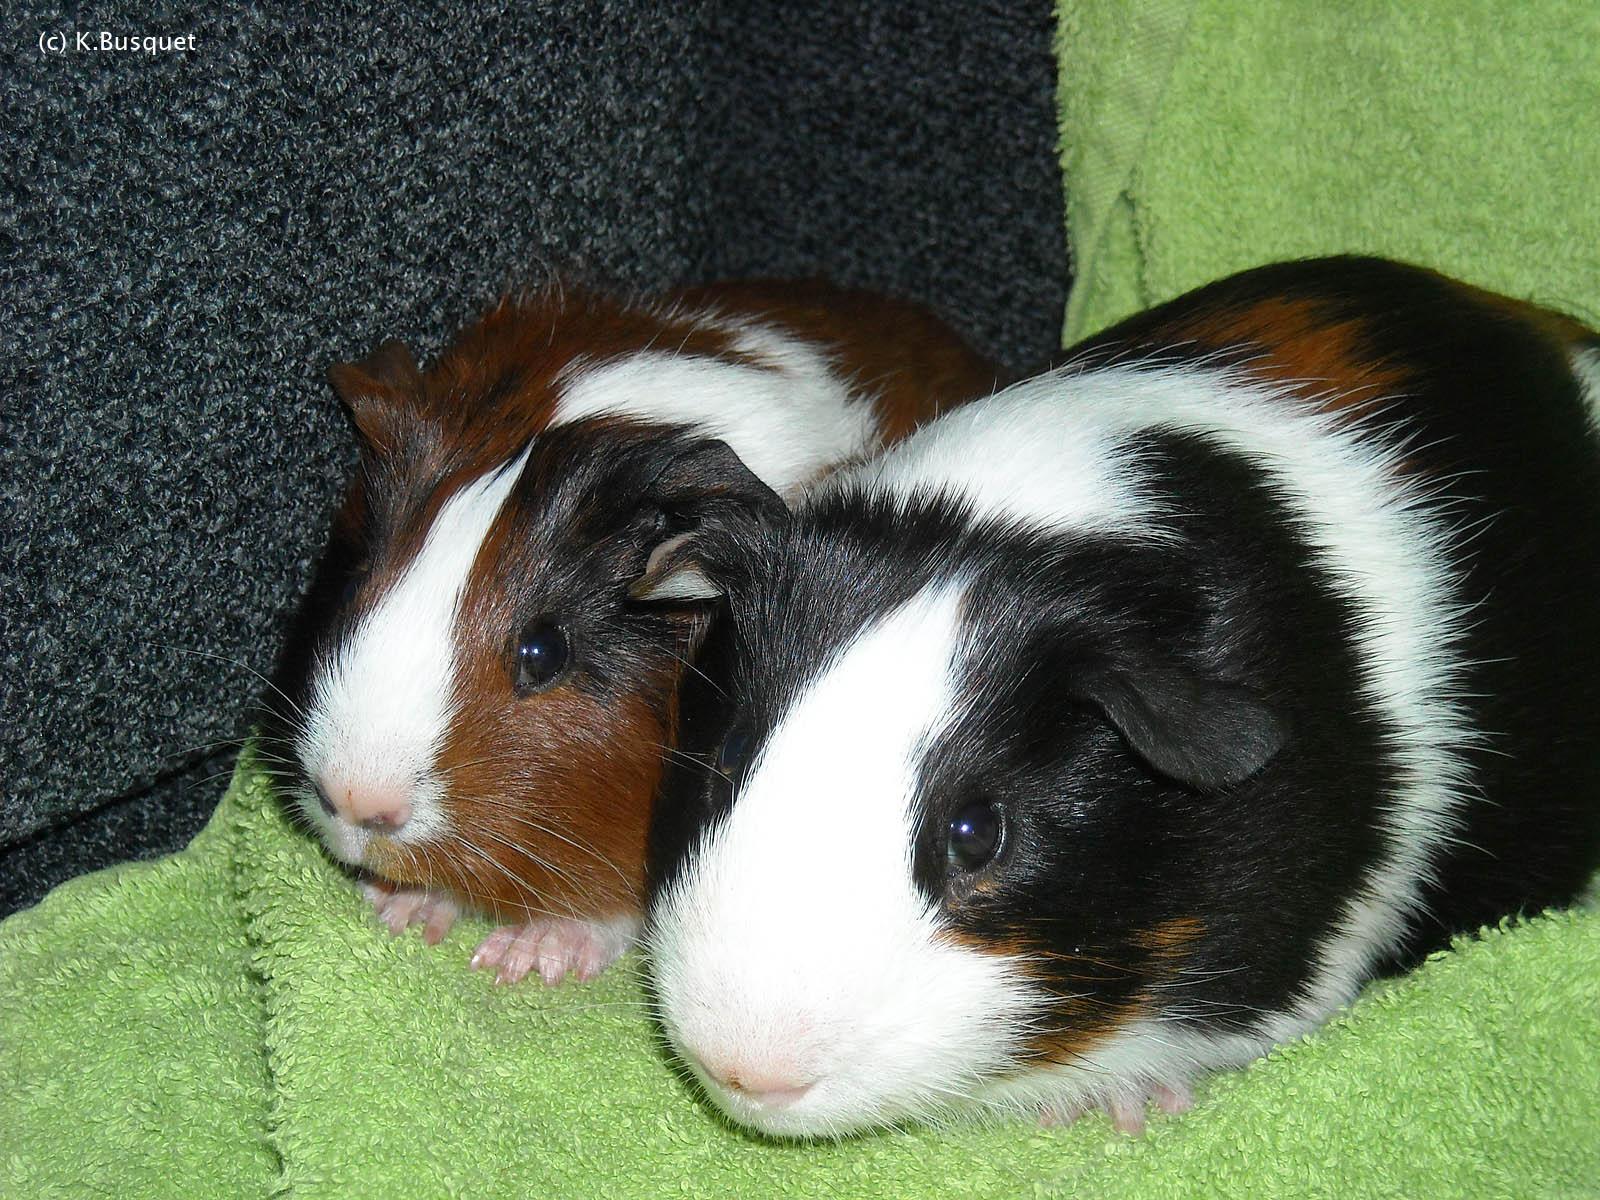 Very Sweet and Cute Animals: Funny Guinea Pig wallpaper for widescreen